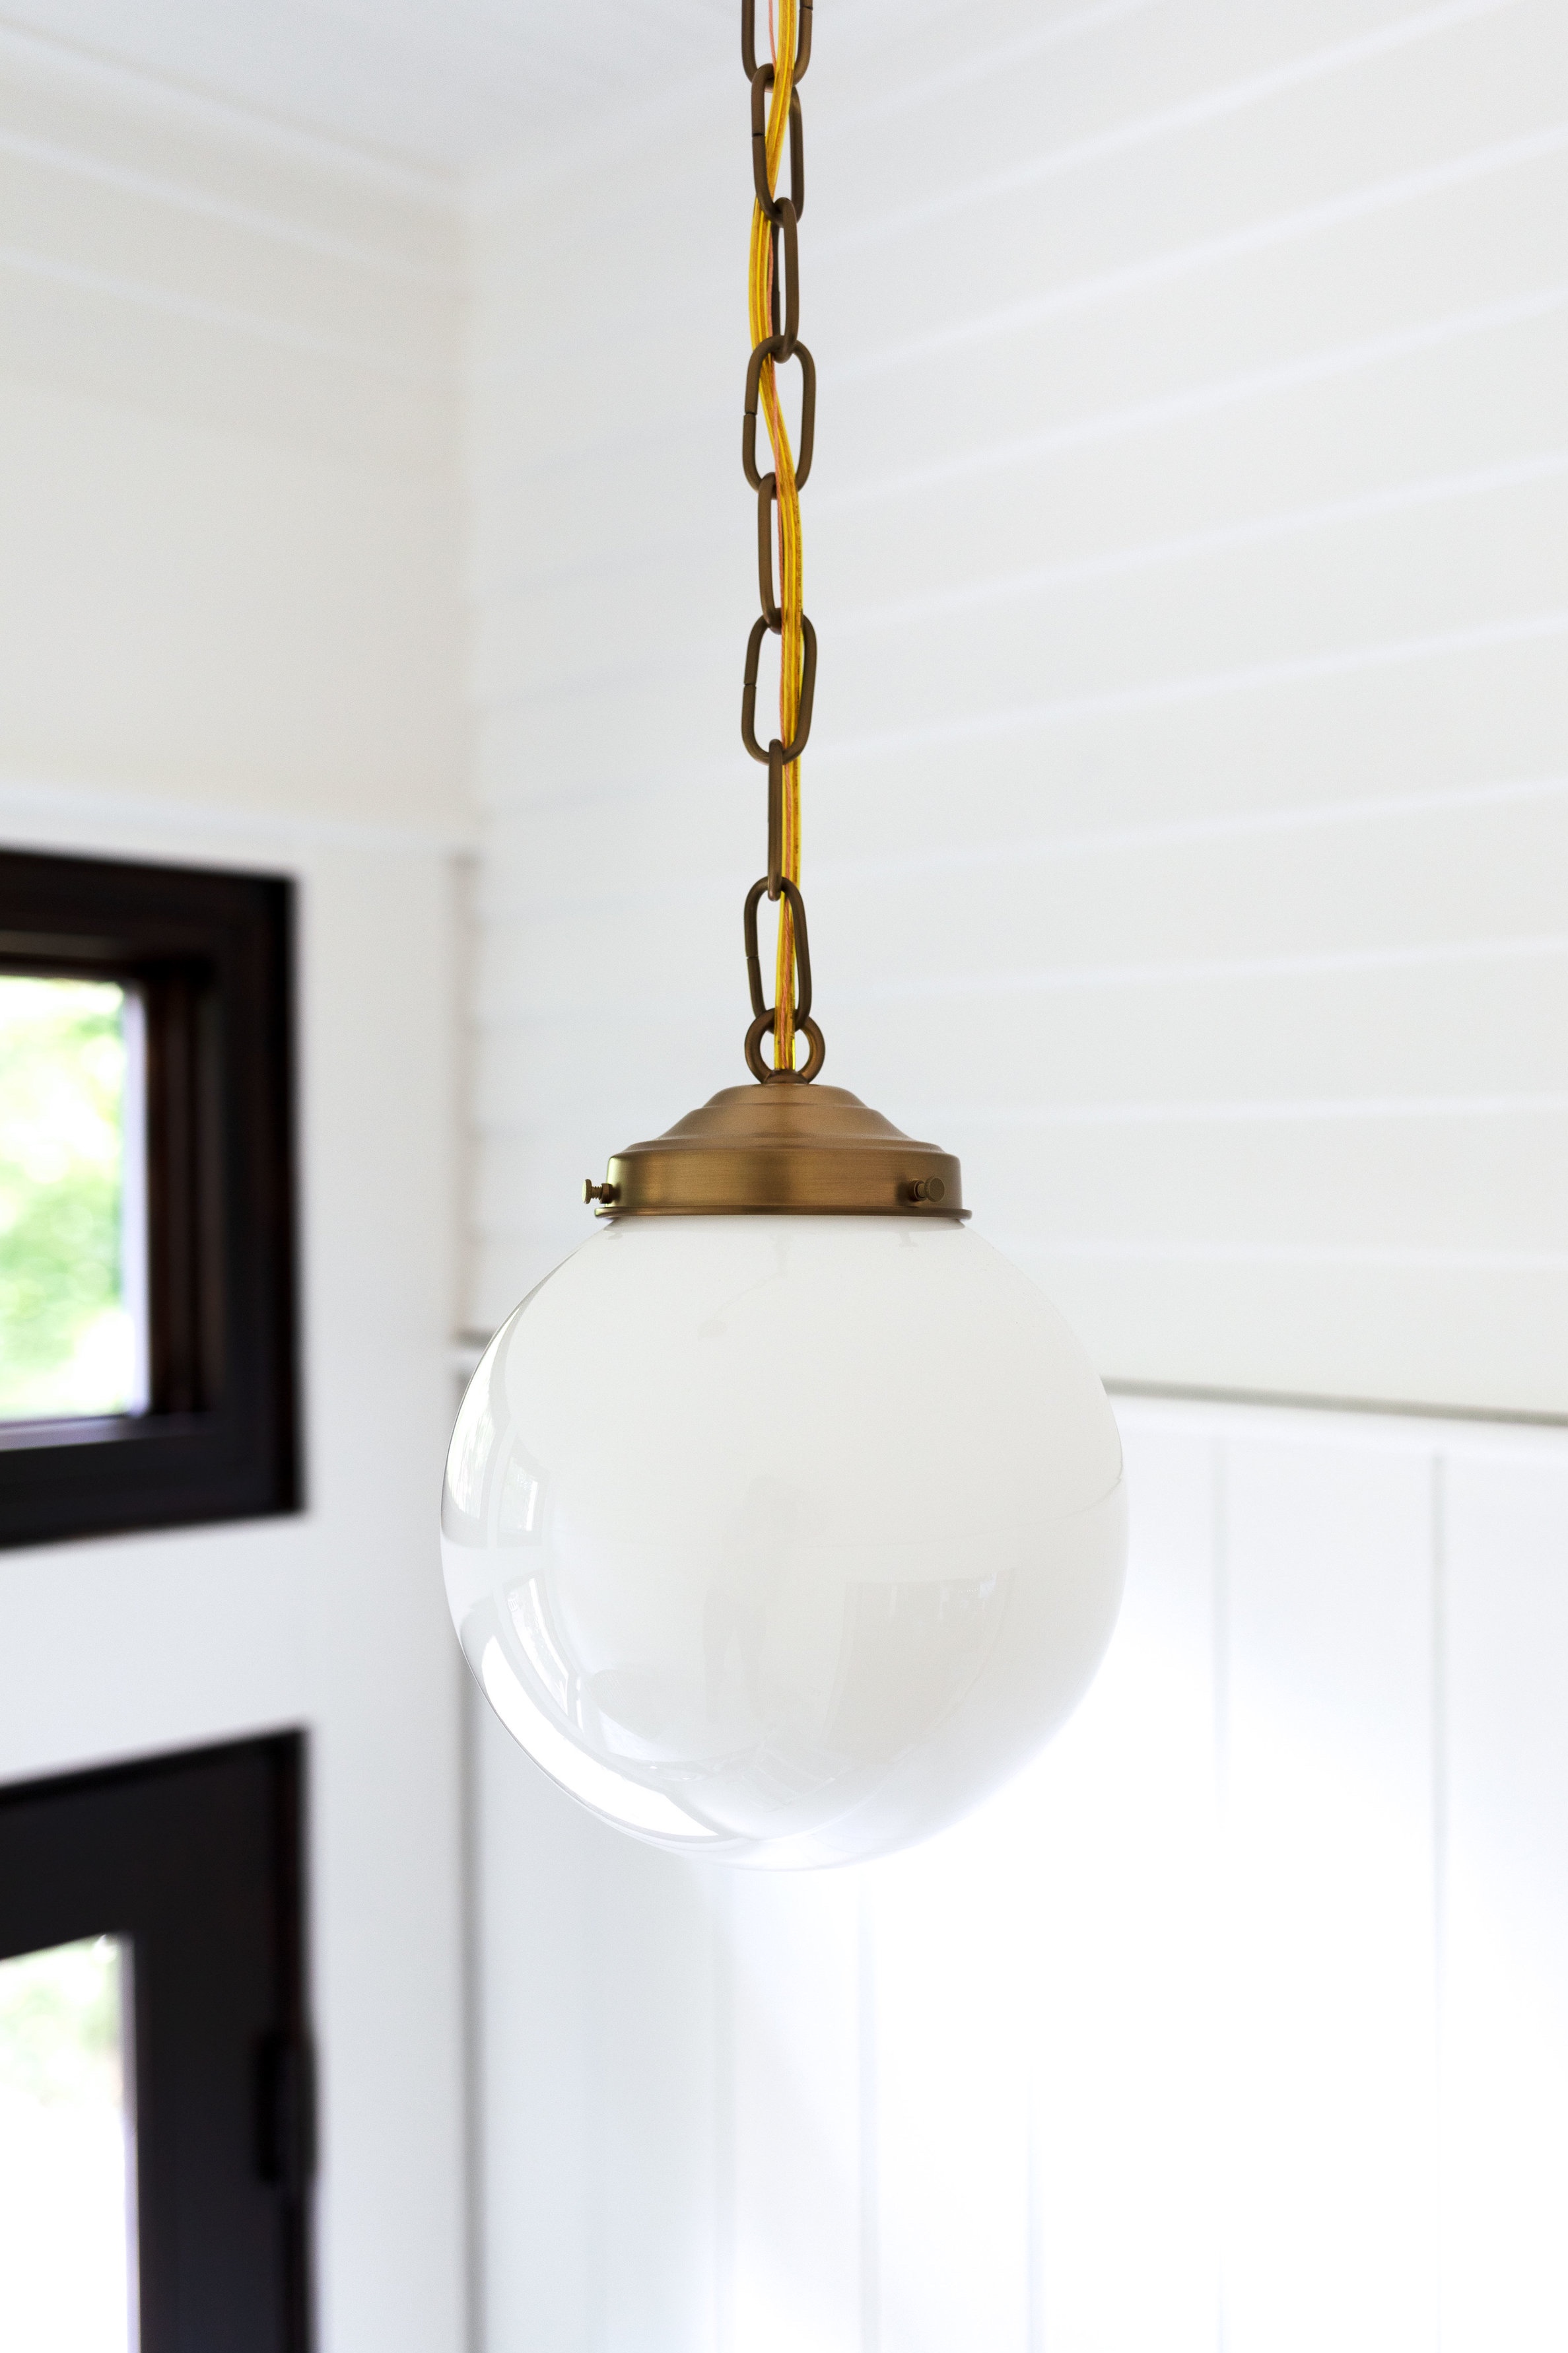 How To Center An Off Center Ceiling Light Without Moving